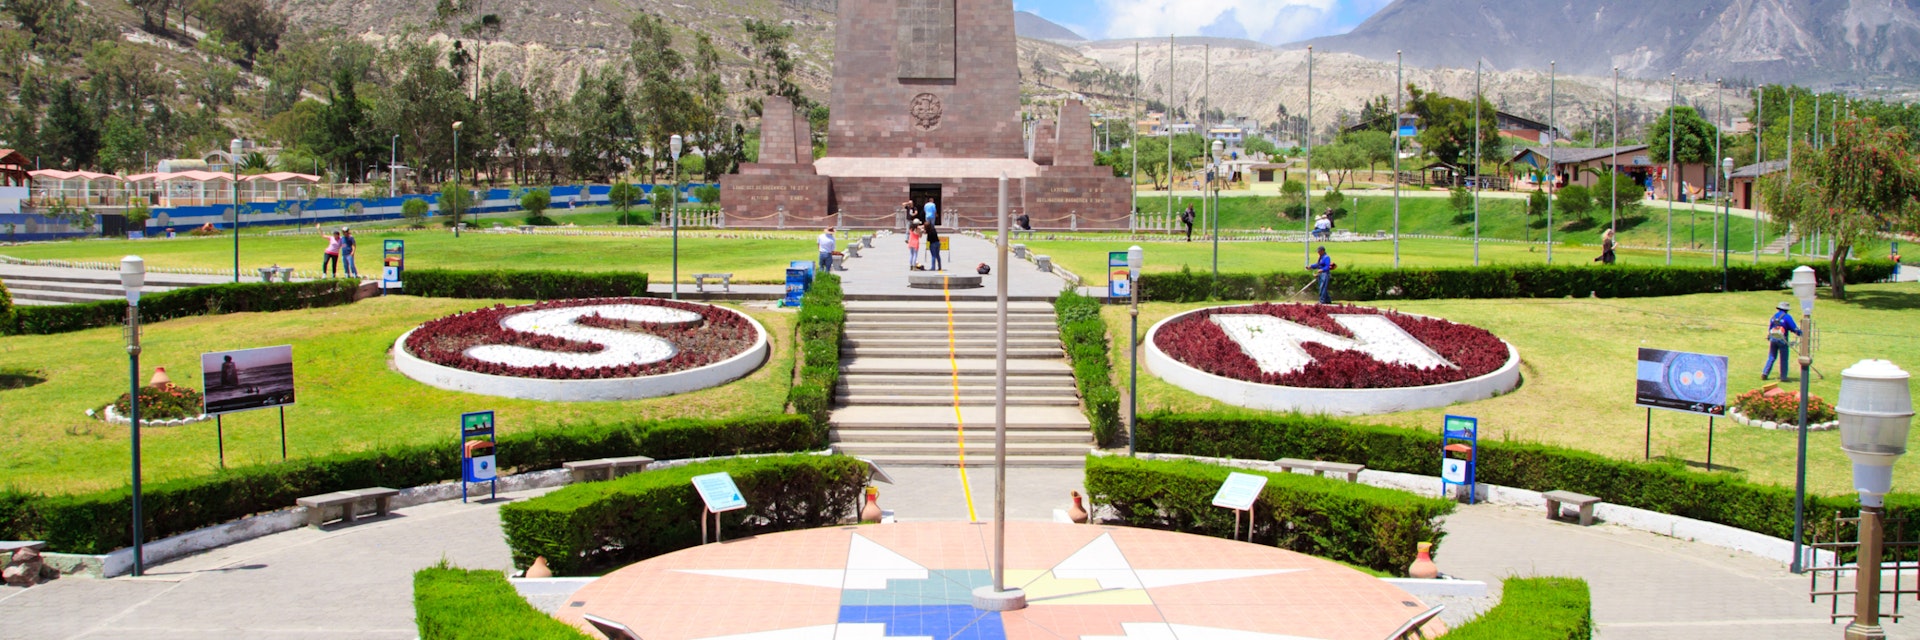 Mitad Del Mundo (Middle of the World) Monument near Quito, Ecuador.; Shutterstock ID 138504449; Your name (First / Last): Josh Vogel; GL account no.: 56530; Netsuite department name: Online Design; Full Product or Project name including edition: Digital Content/Sights